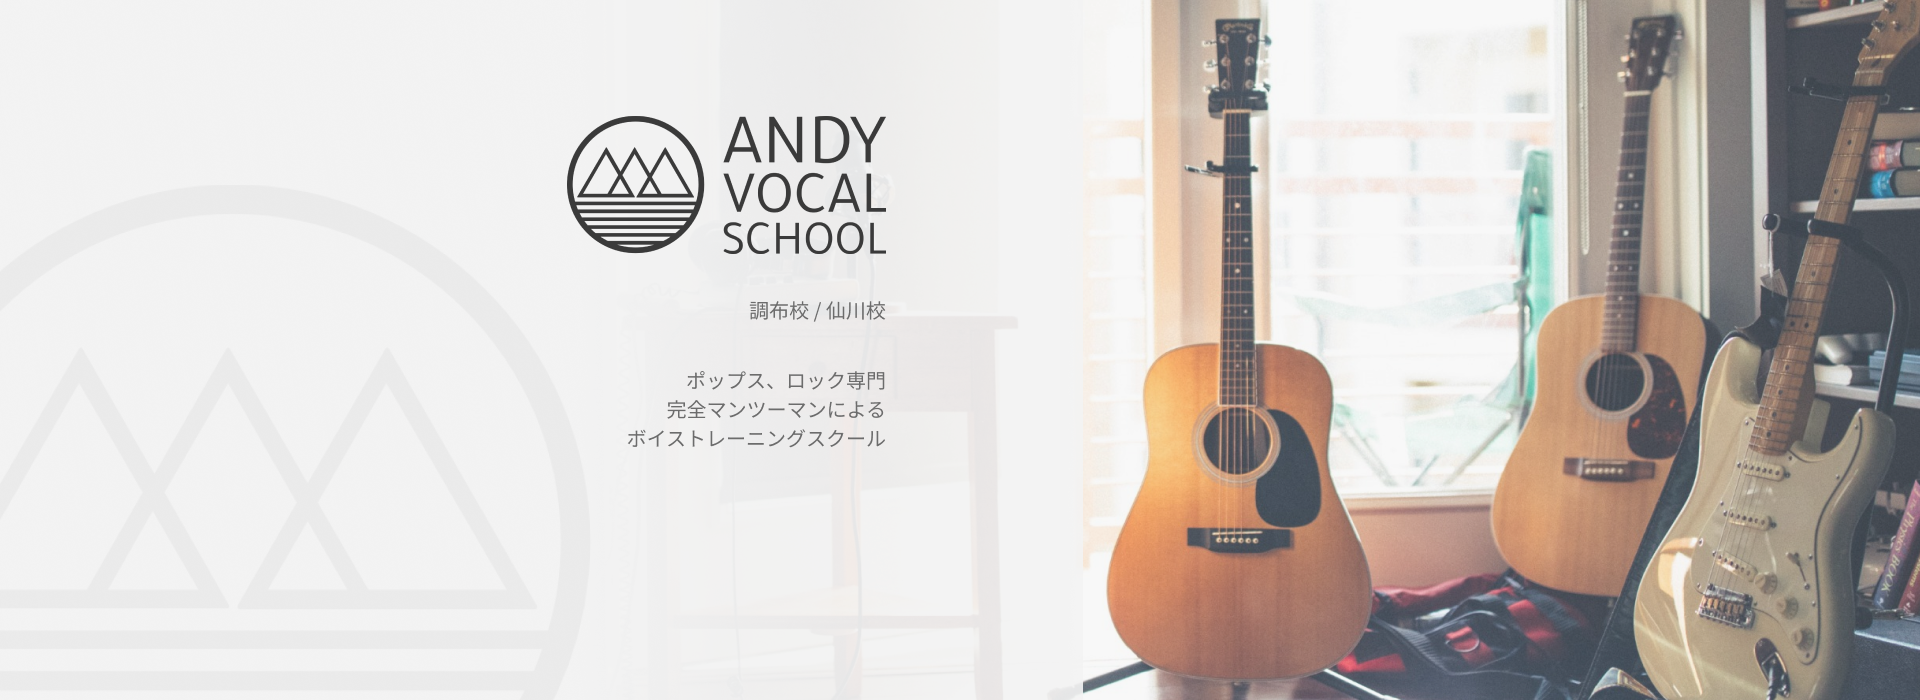 Andy Vocal School